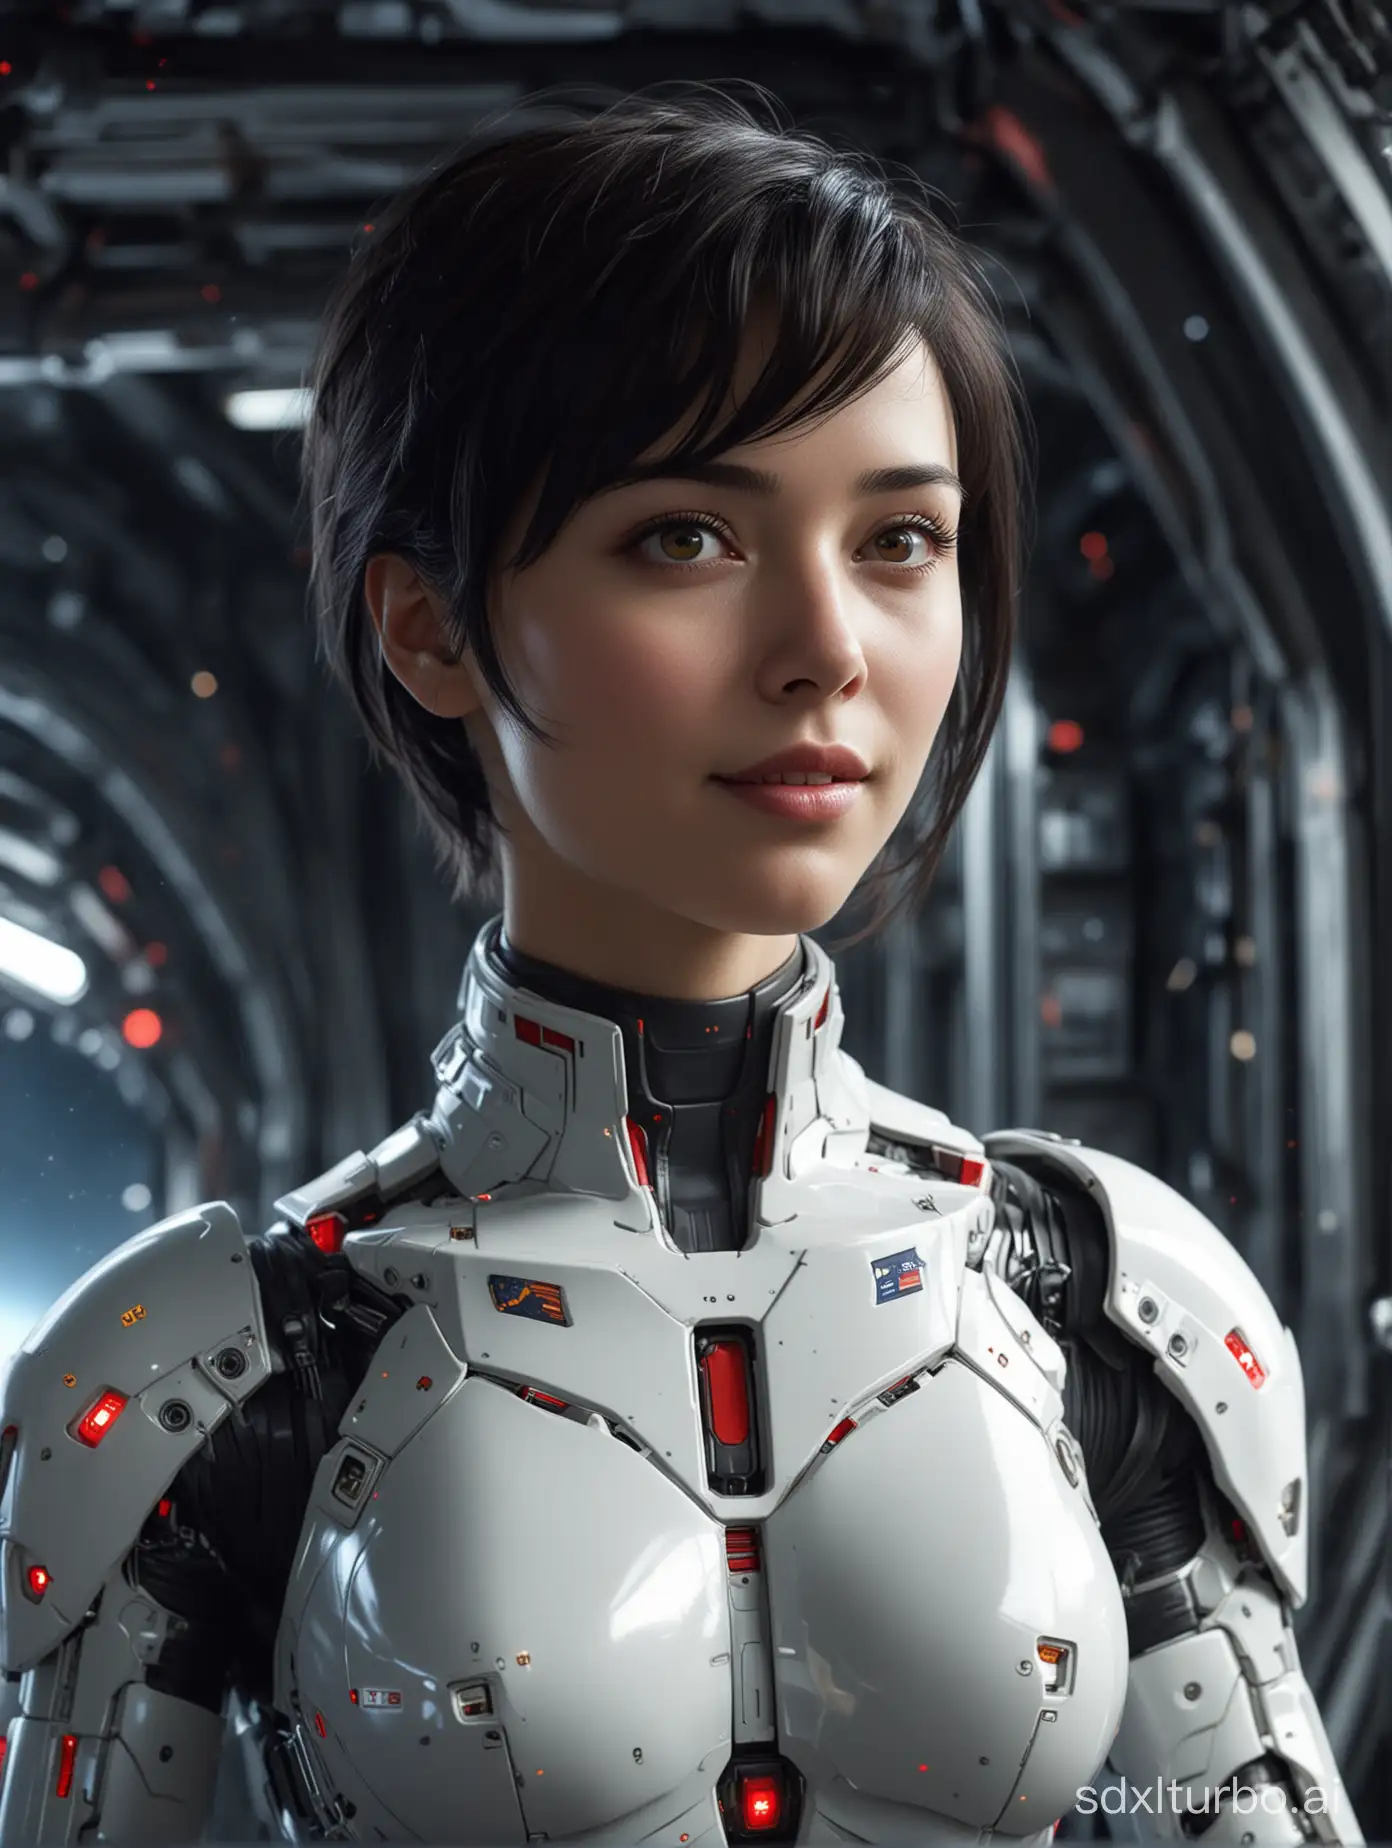  In the vast expanse of deep space, aboard a formidable warship, a petite android stands upon the deck, her figure a mesmerizing blend of sleek machinery and graceful masculinity. From the neck down, she is predominantly mechanical, her form encased in white plasteel armor with striking red accents emitting a subtle glow, seamlessly integrating with her human-like features.

Short silky black hair, yet remarkably detailed, android face. With delicate sensors mimicking human expressions, she wears a wide grin as she gazes out into the infinite abyss beyond the viewport.

Her eyes, a captivating shade of brown, gleam with a hint of artificial luminescence, reflecting the distant stars that dot the cosmos. In this moment, she is the embodiment of freedom, a testament to the boundless possibilities that await those who dare to explore the depths of space and the uncharted territories that lie beyond."